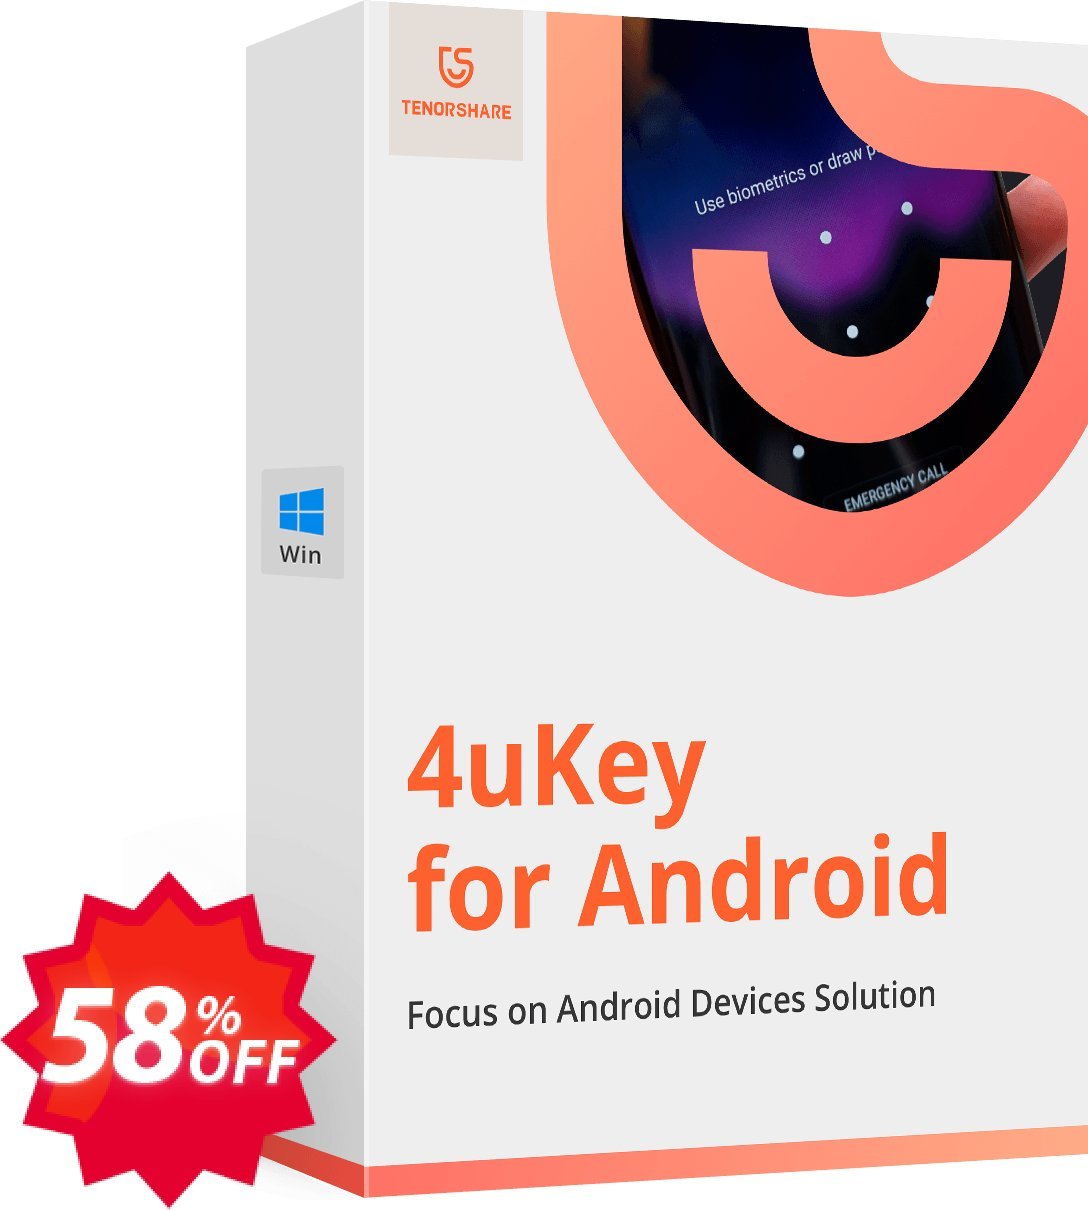 Tenorshare 4uKey for Android, Monthly Plan  Coupon code 58% discount 